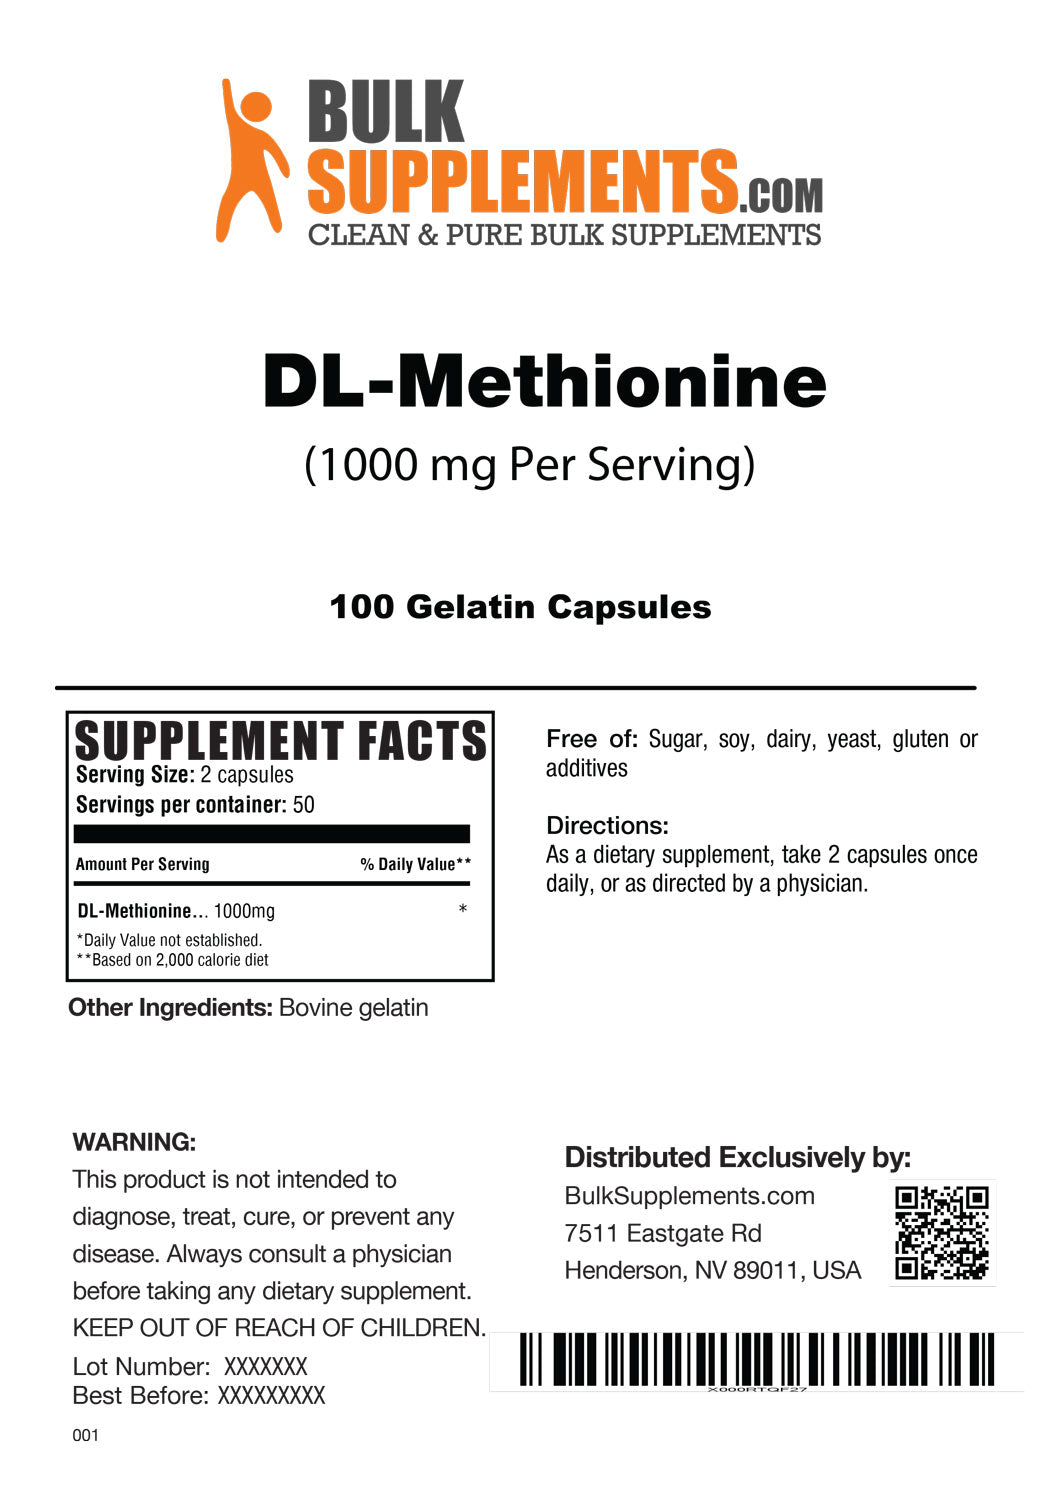 Supplement Facts DL-Methionine 1000mg